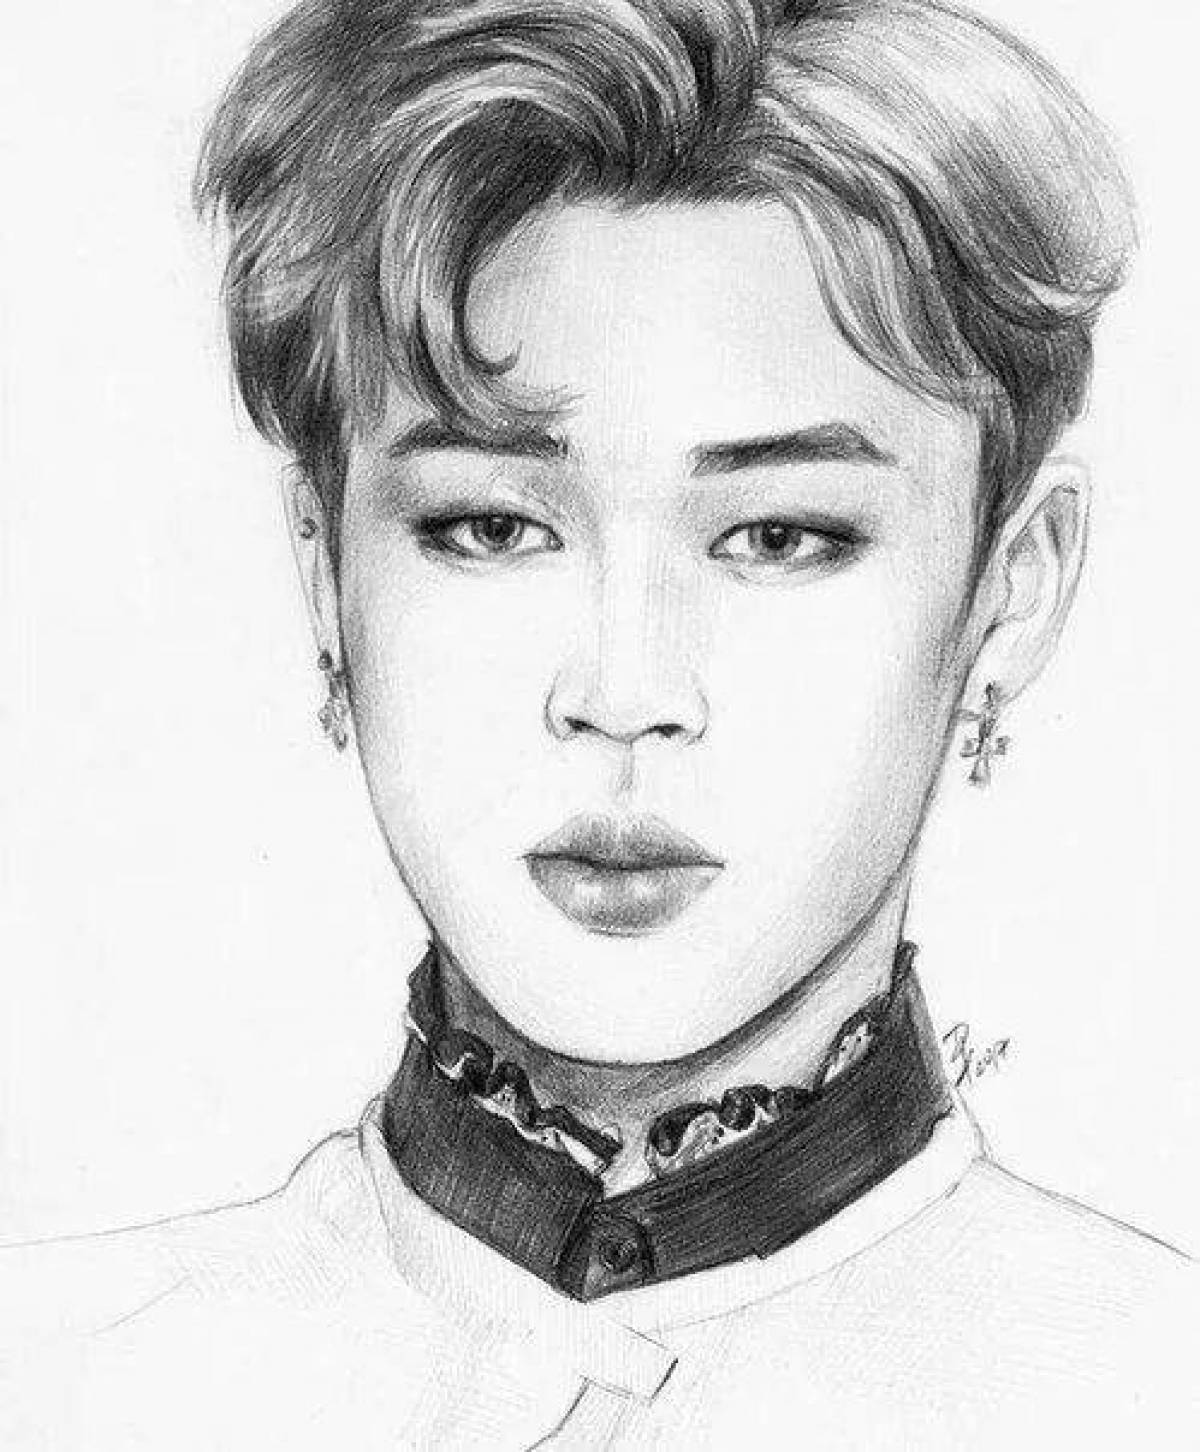 Jimin's inspirational coloring page